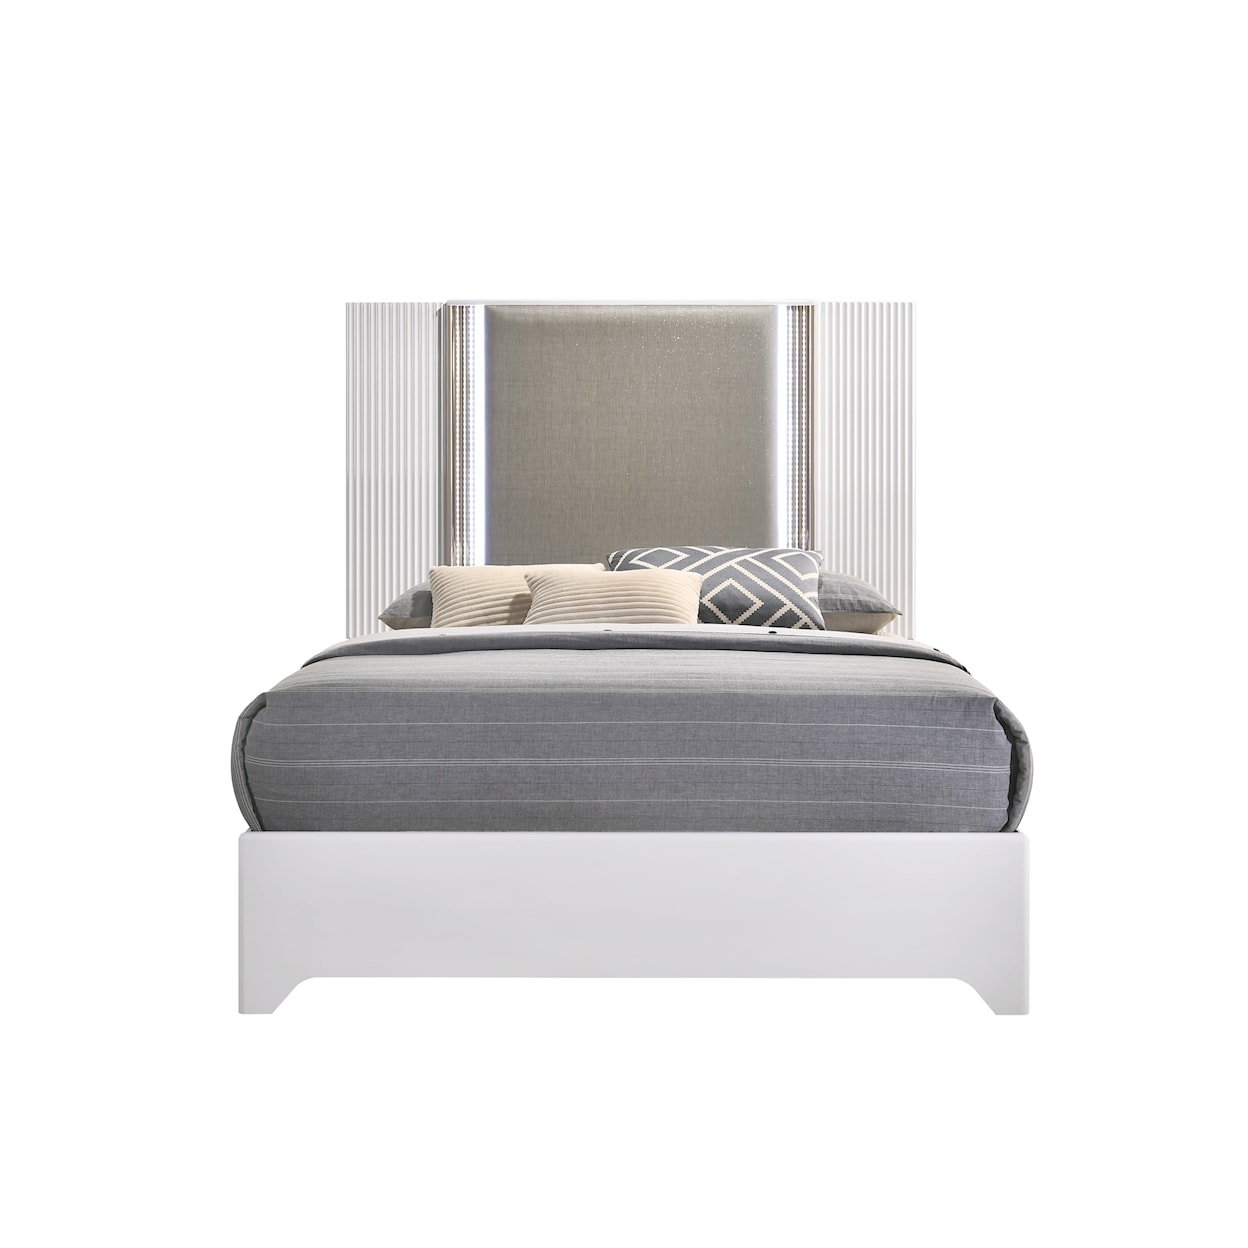 Global Furniture Everest EVEREST WHITE QUEEN BED |